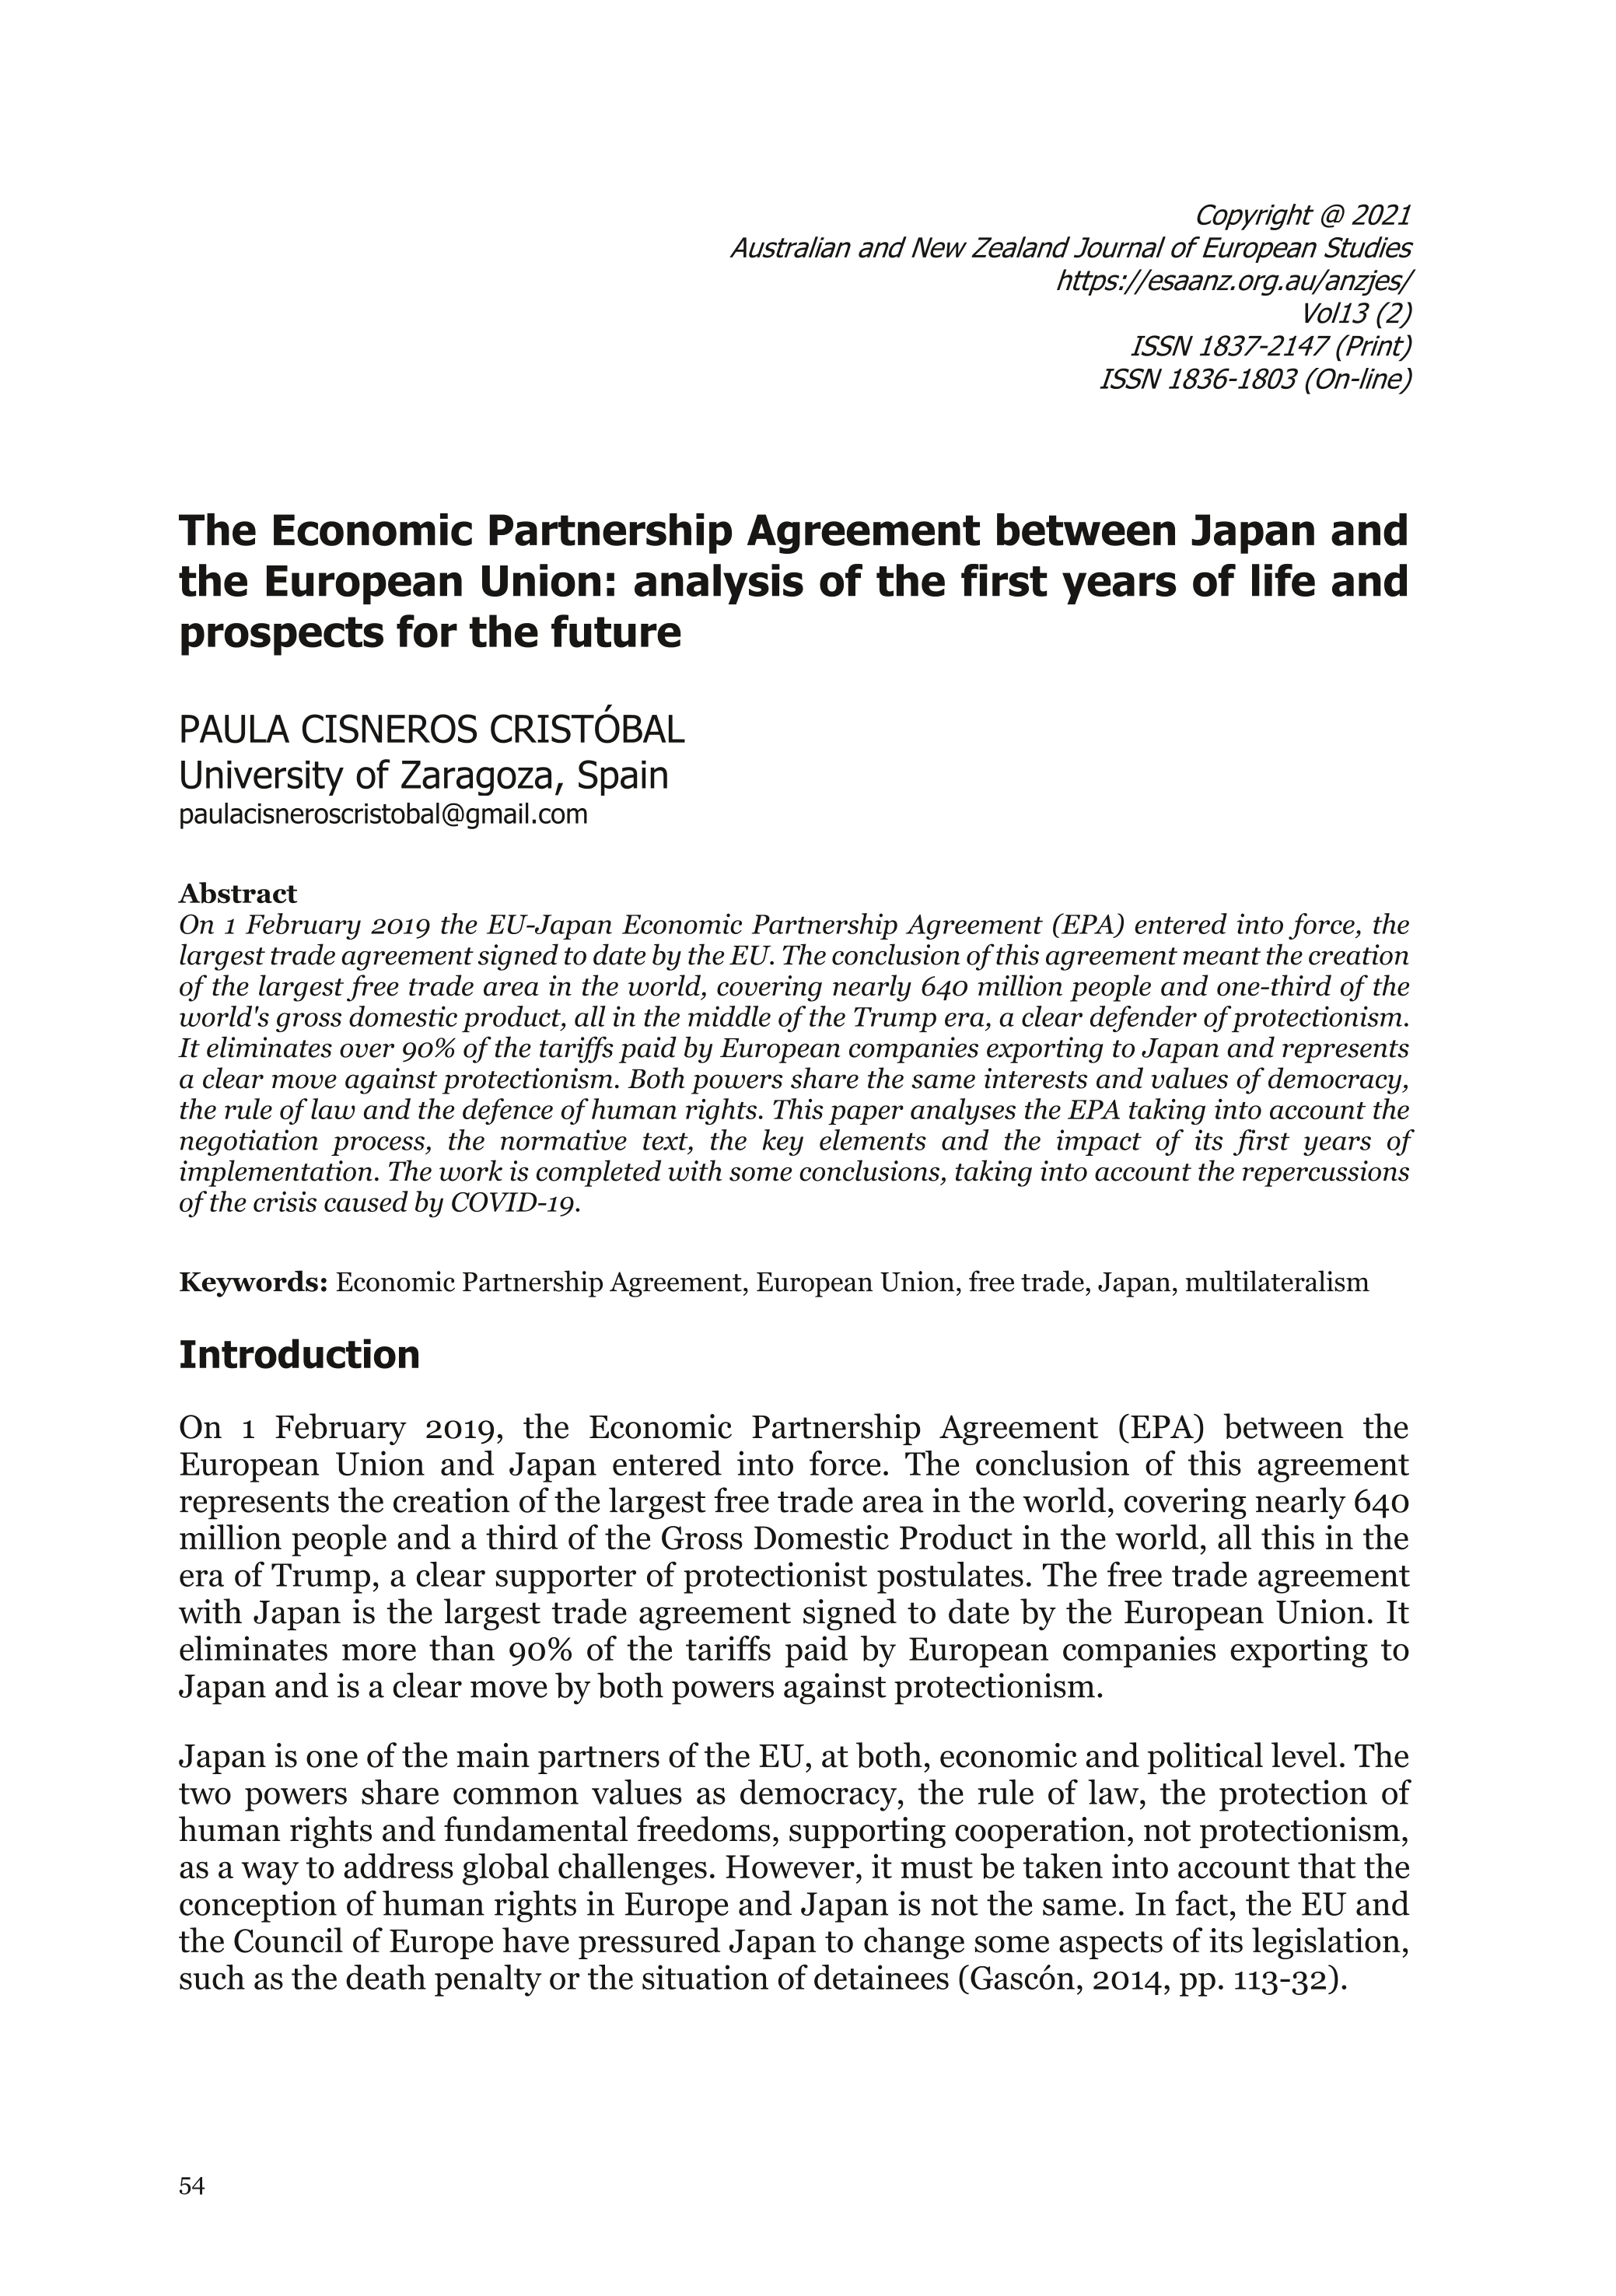 The Economic Partnership Agreement between Japan and the European Union: analysis of the first years of life and prospects for the future